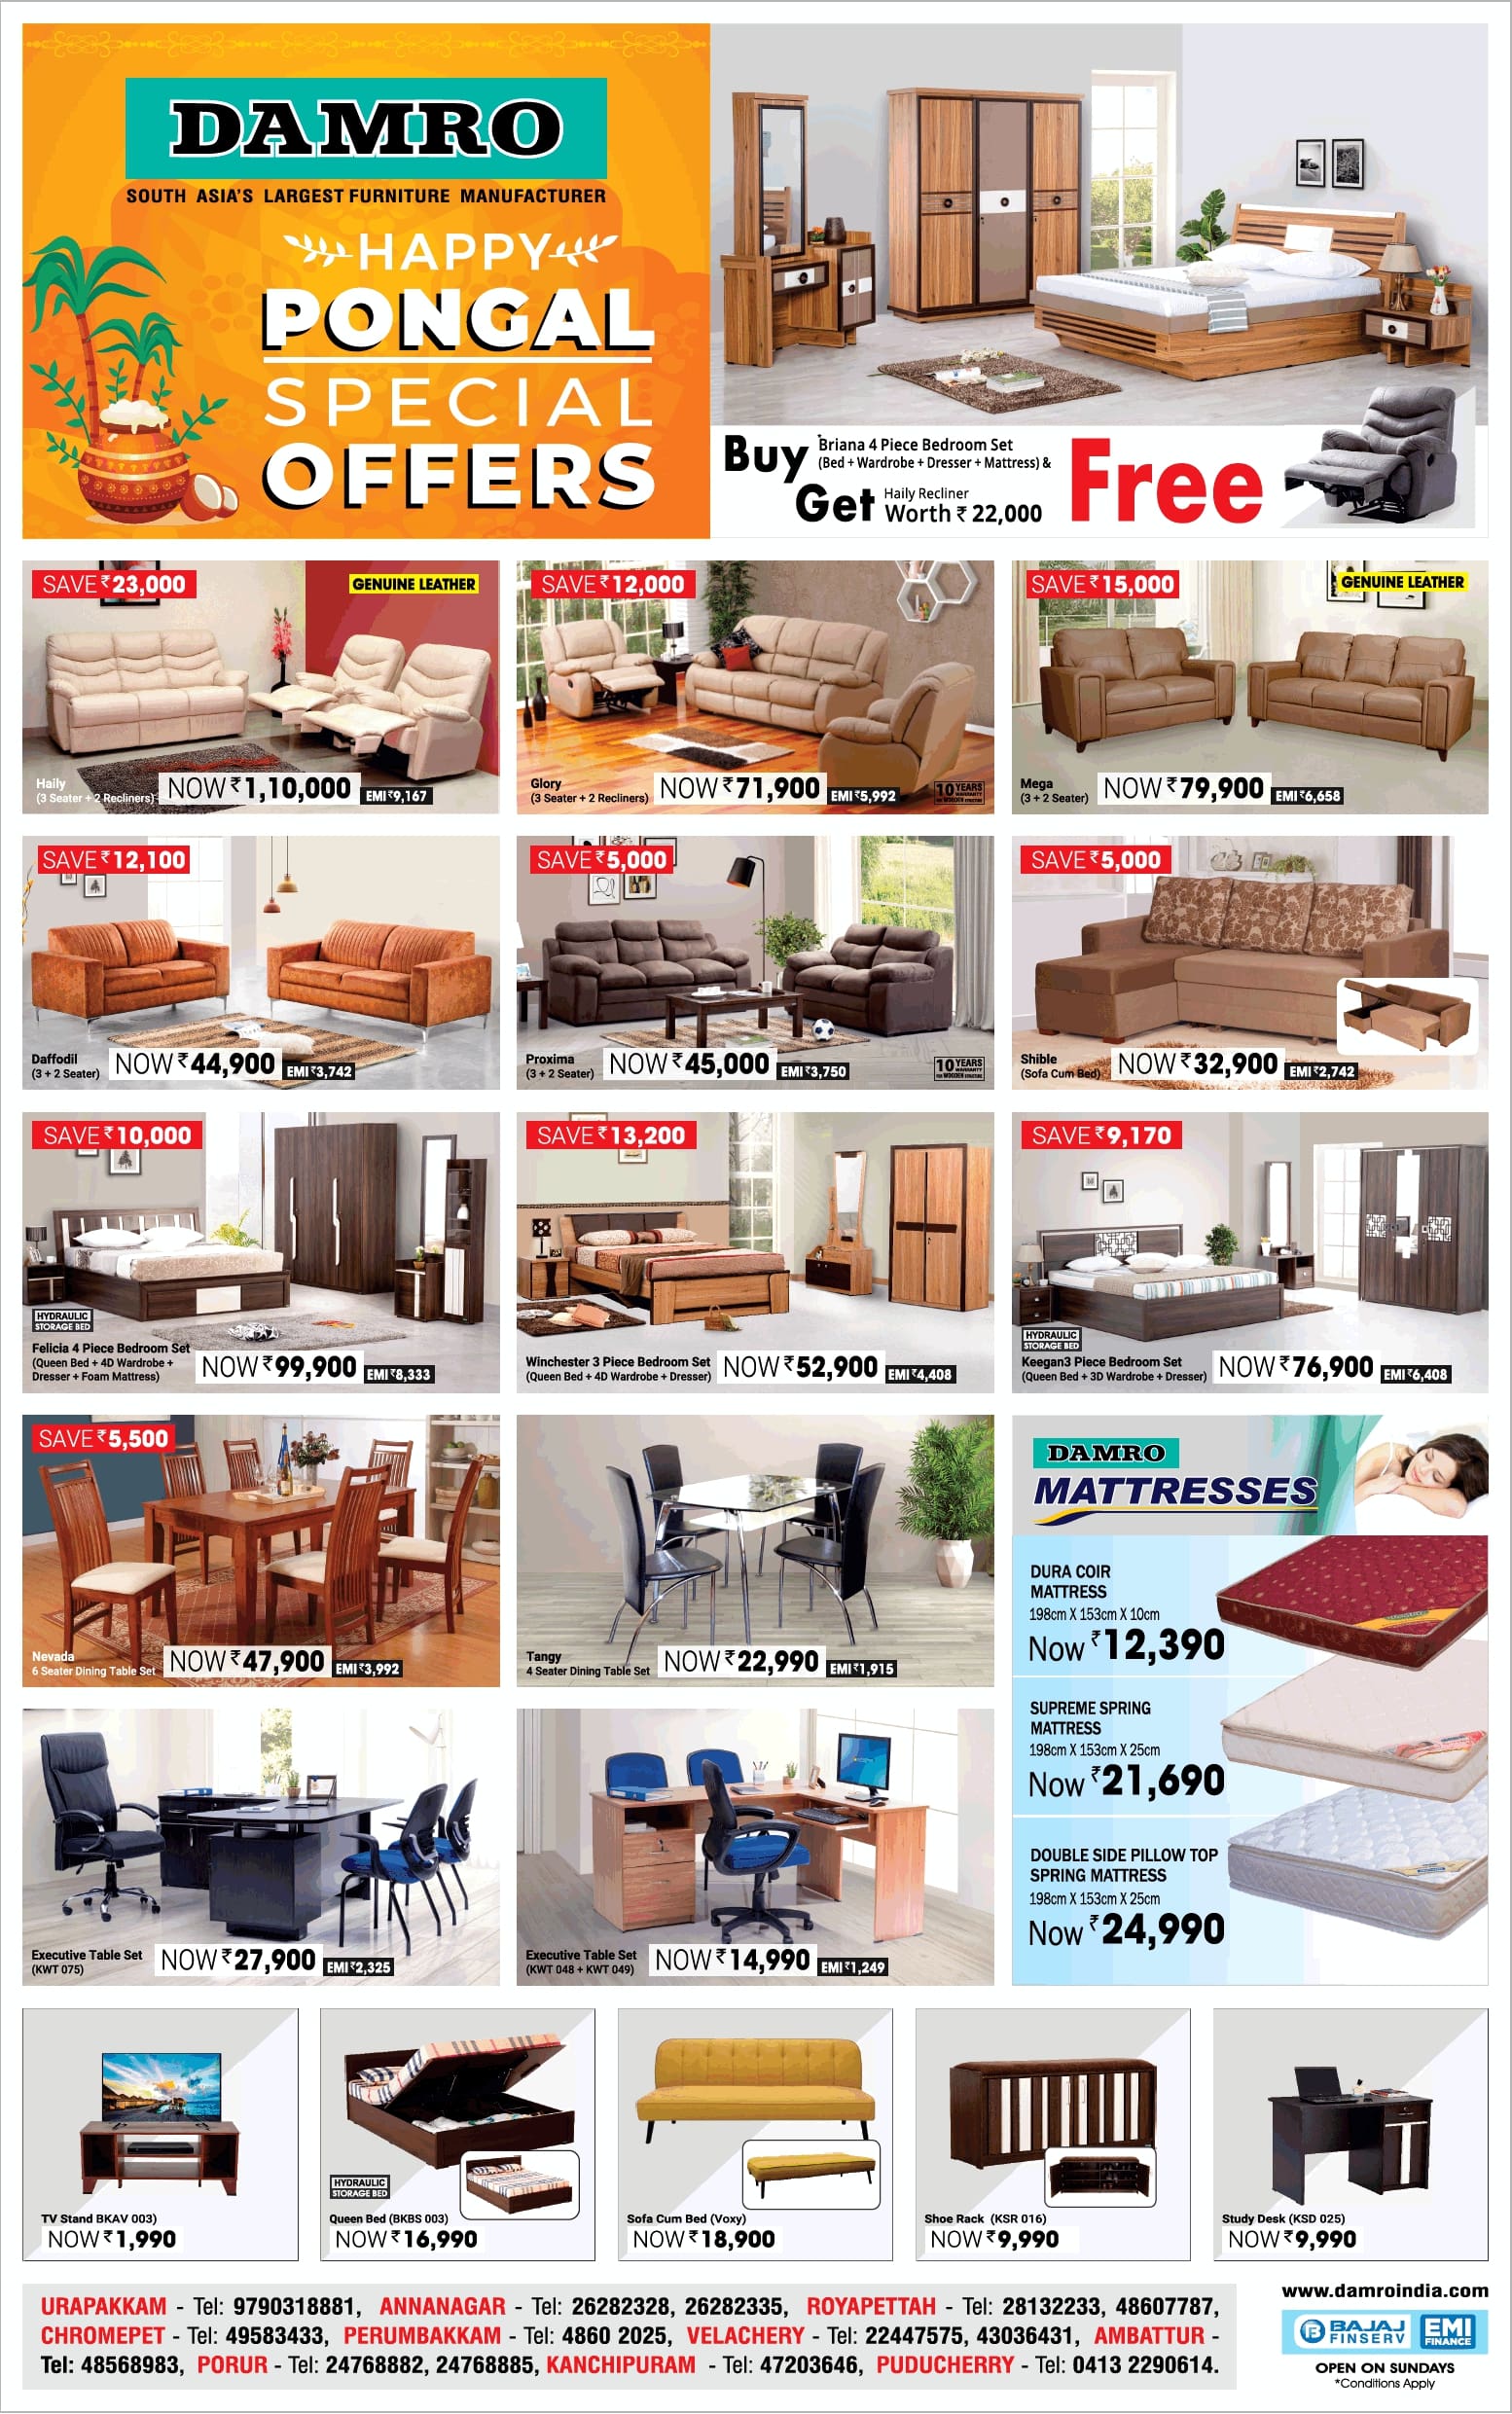 damro-happy-pongal-special-offers-ad-chennai-times-08-01-2021